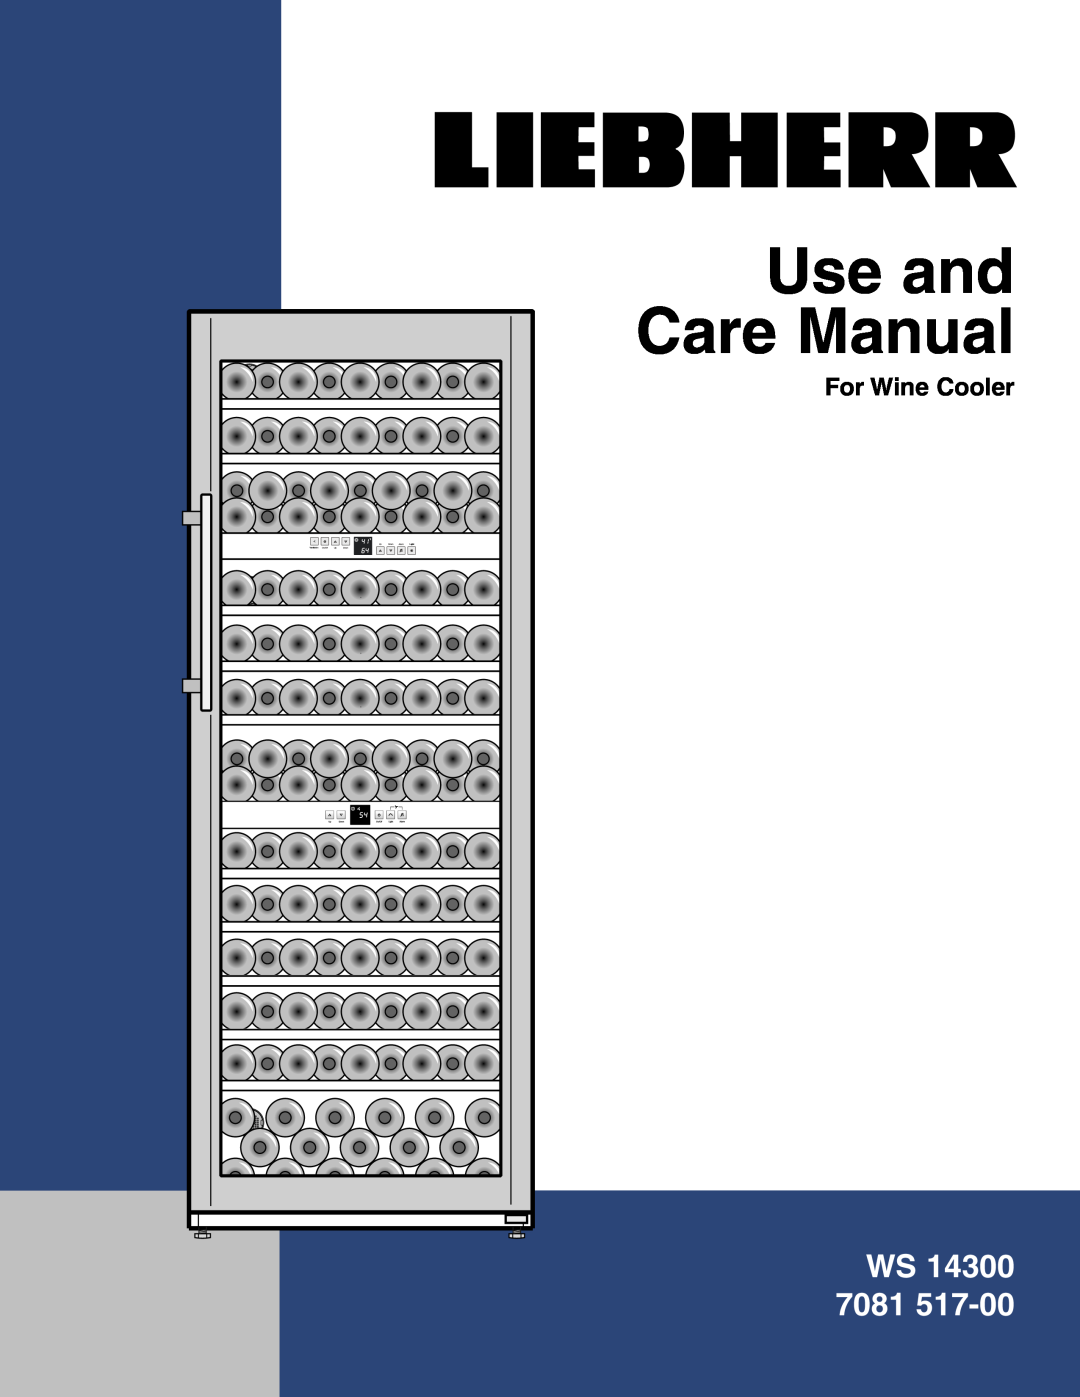 Liebherr WS14300 manual For Wine Cooler, Use and Care Manual, Ws 